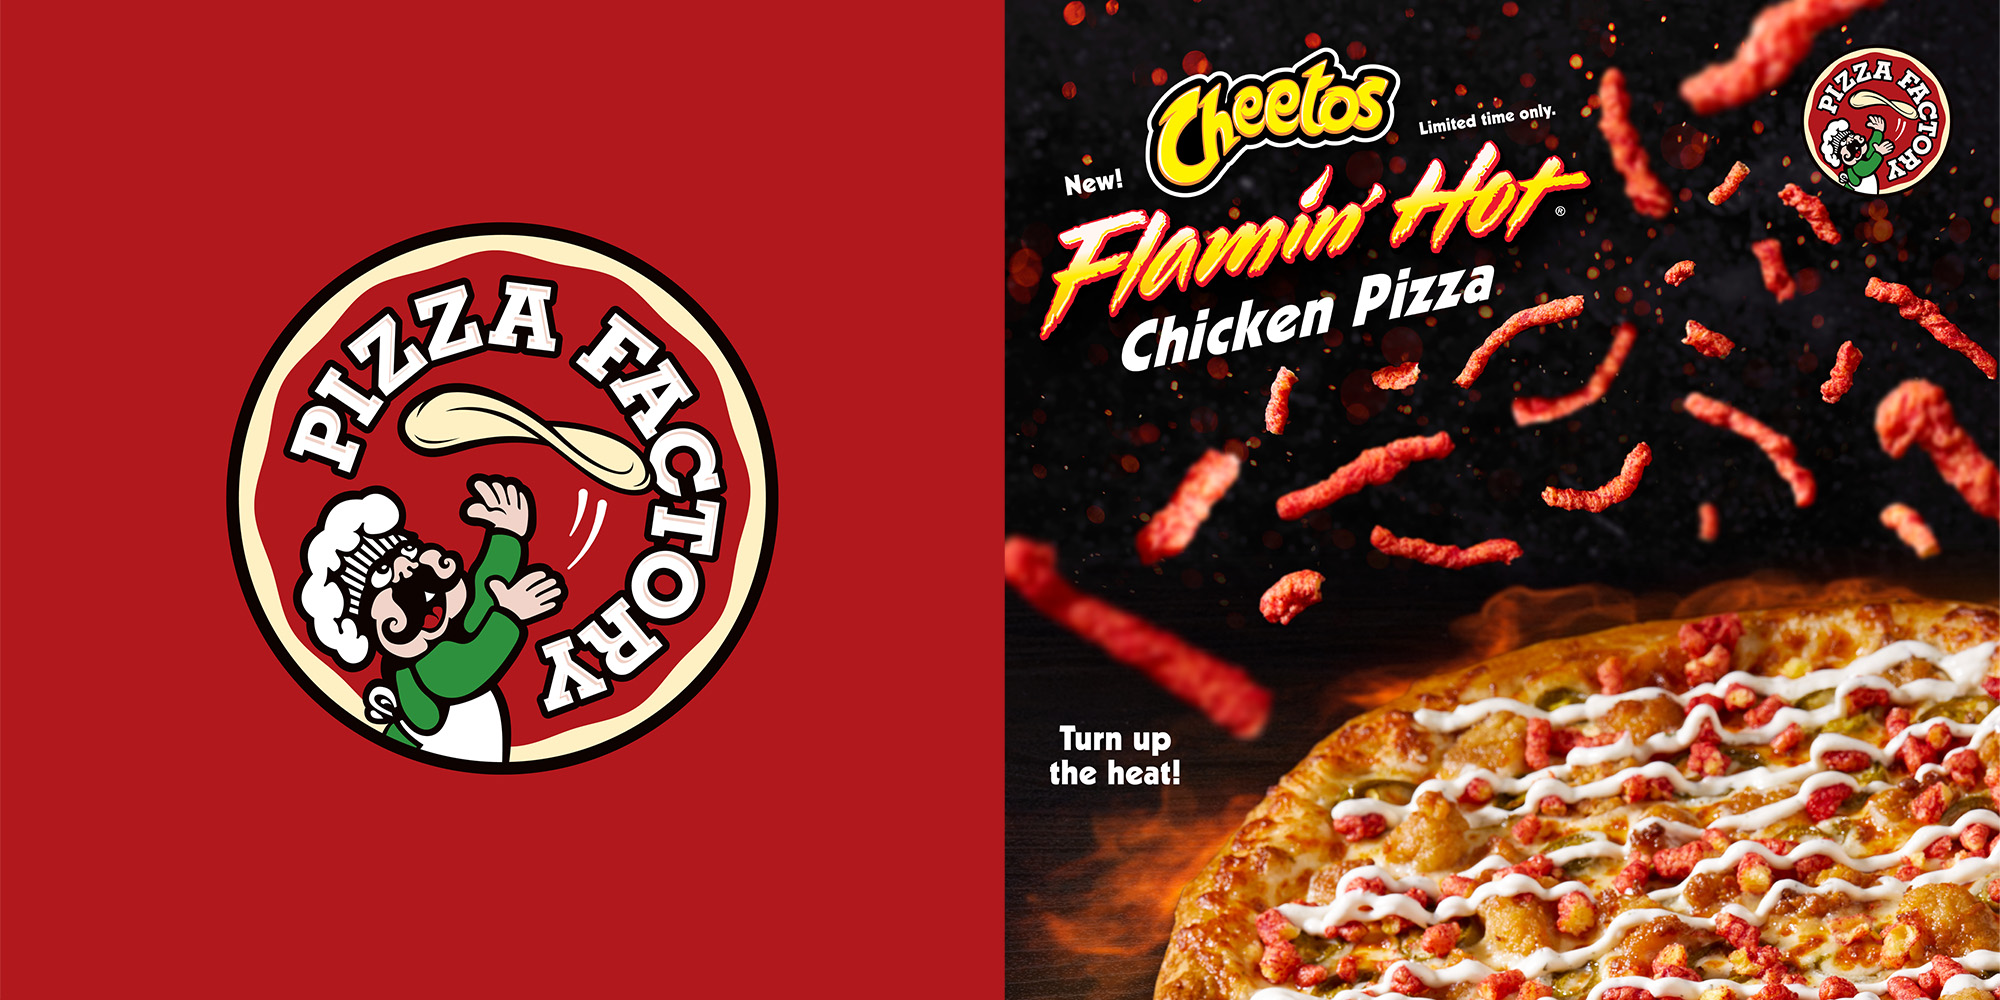 Pizza factory logo and advertisement for flamin hot chicken pizza